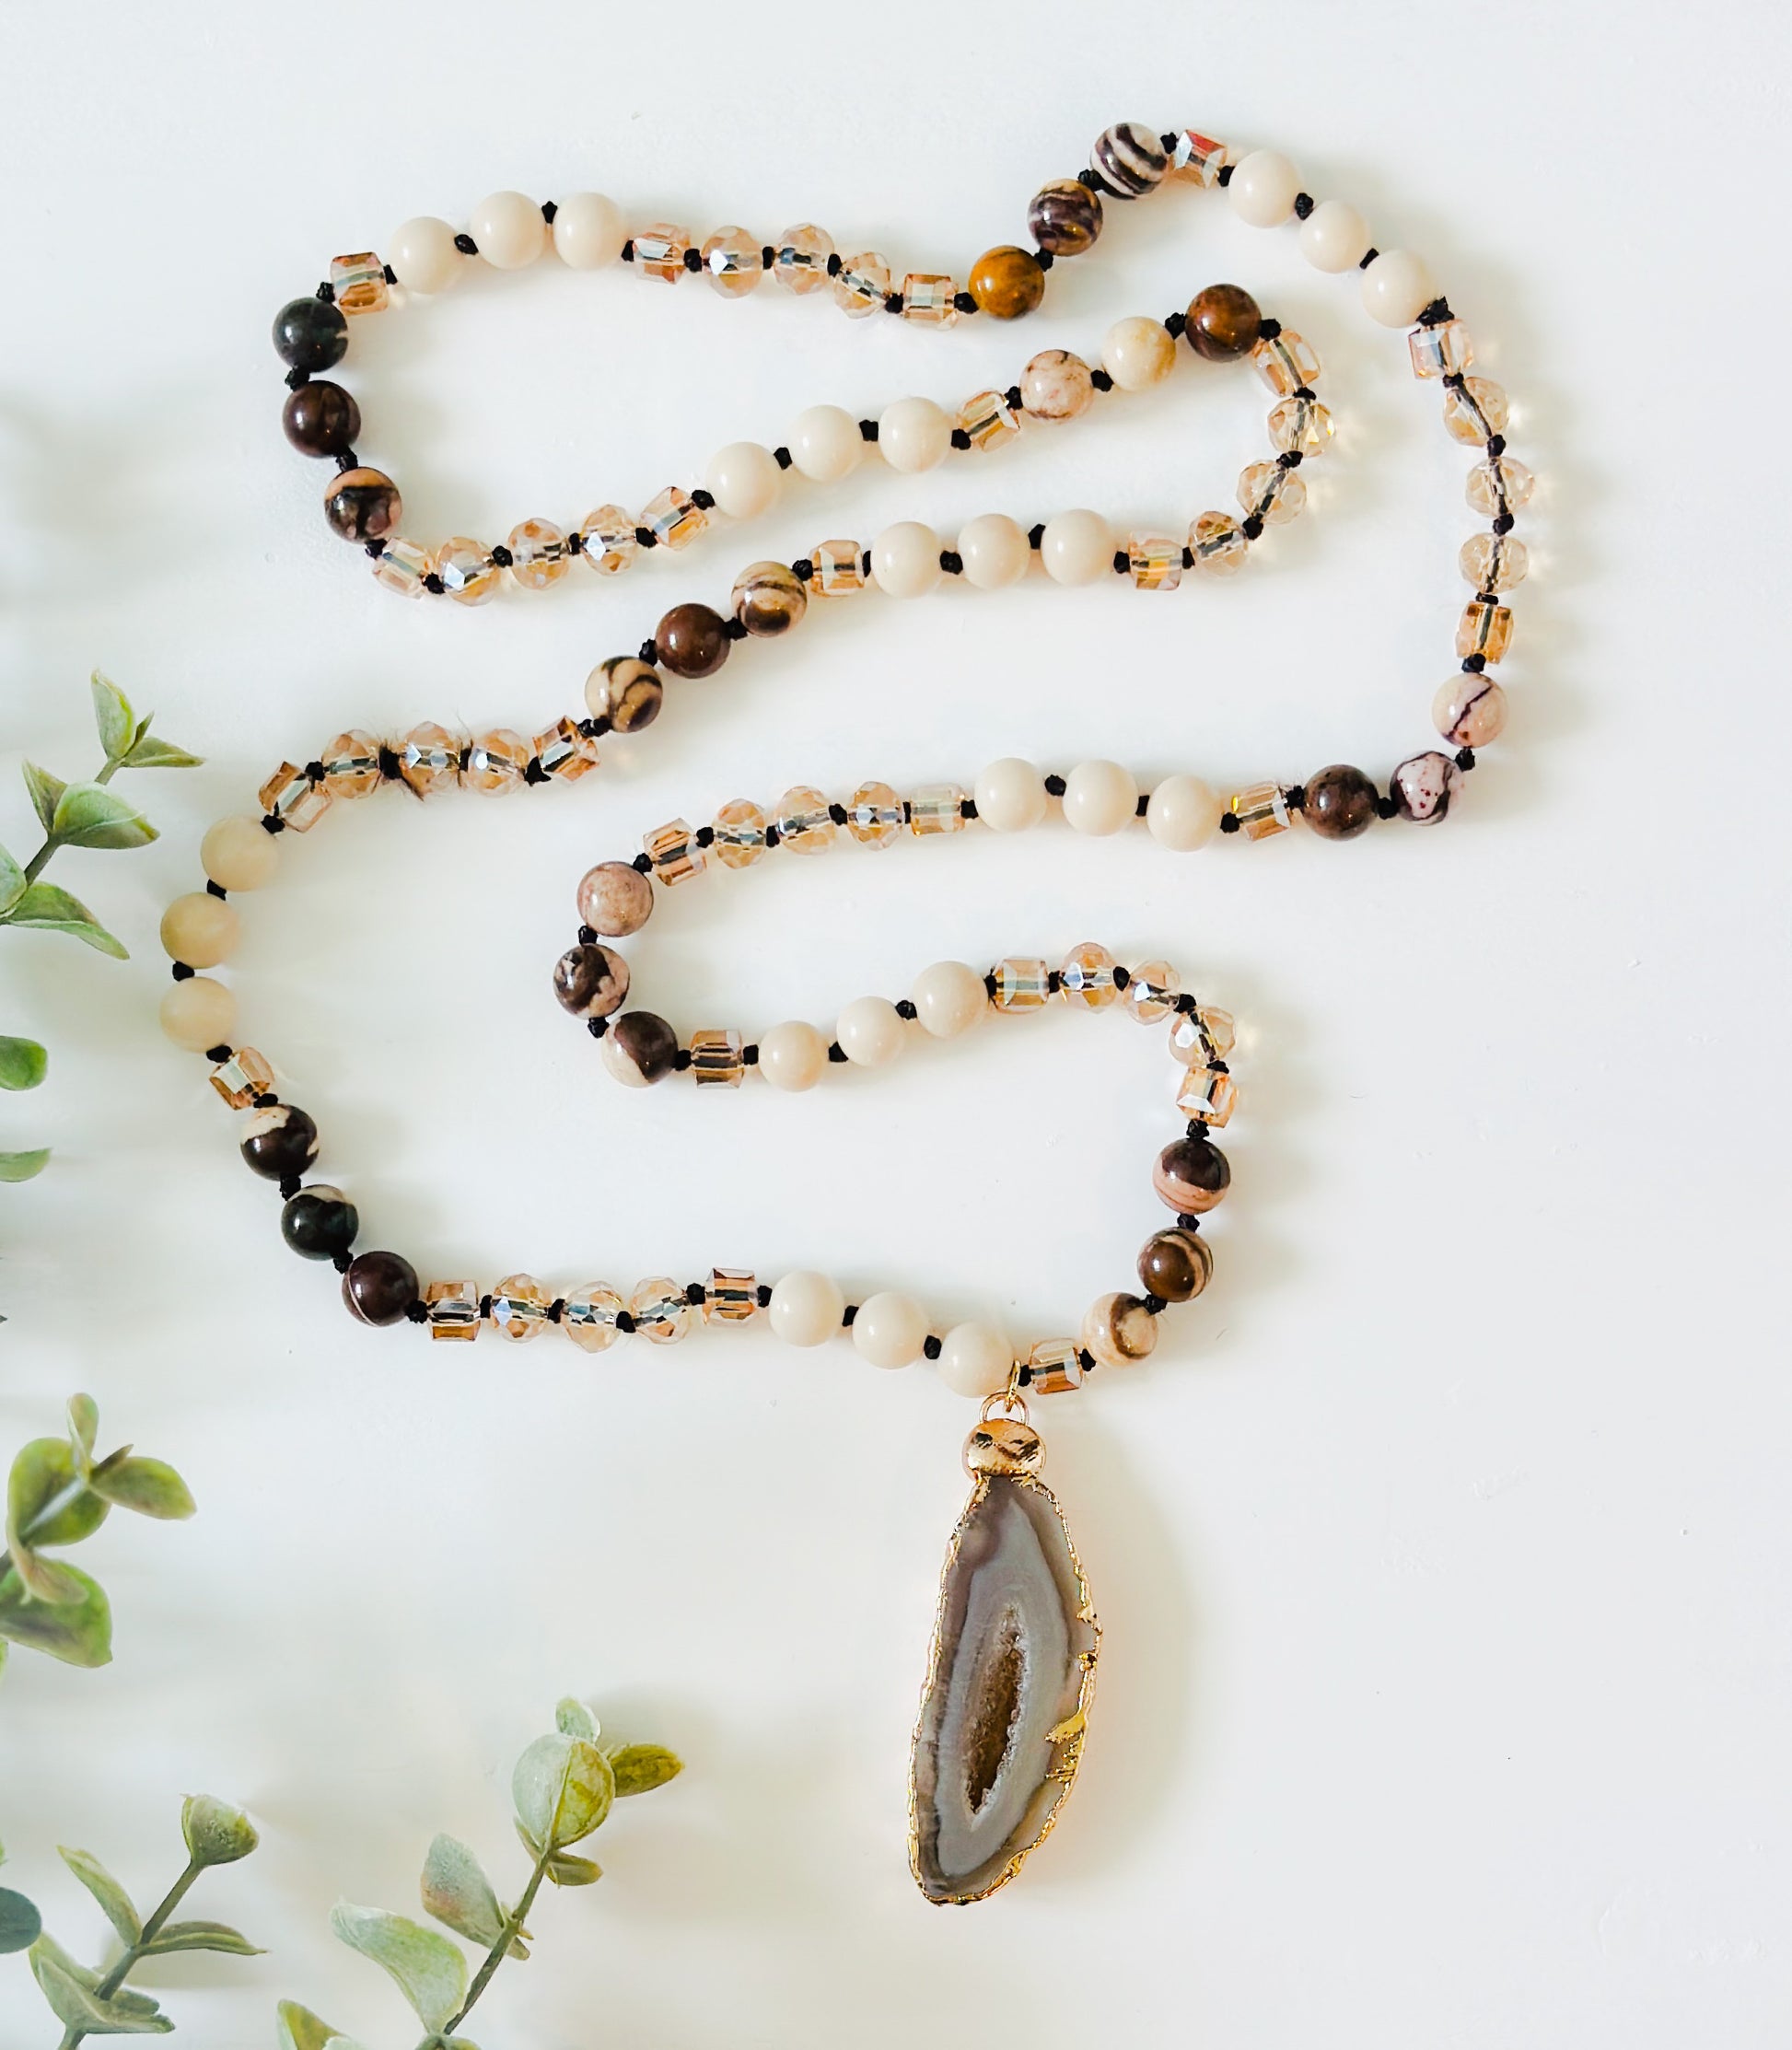 "The Arlo" gemstone necklace, a masterpiece that merges the grounding essence of River Stone Jasper gemstones, the delicate charm of glass beads, and the captivating allure of a Druzy Agate pendant. 